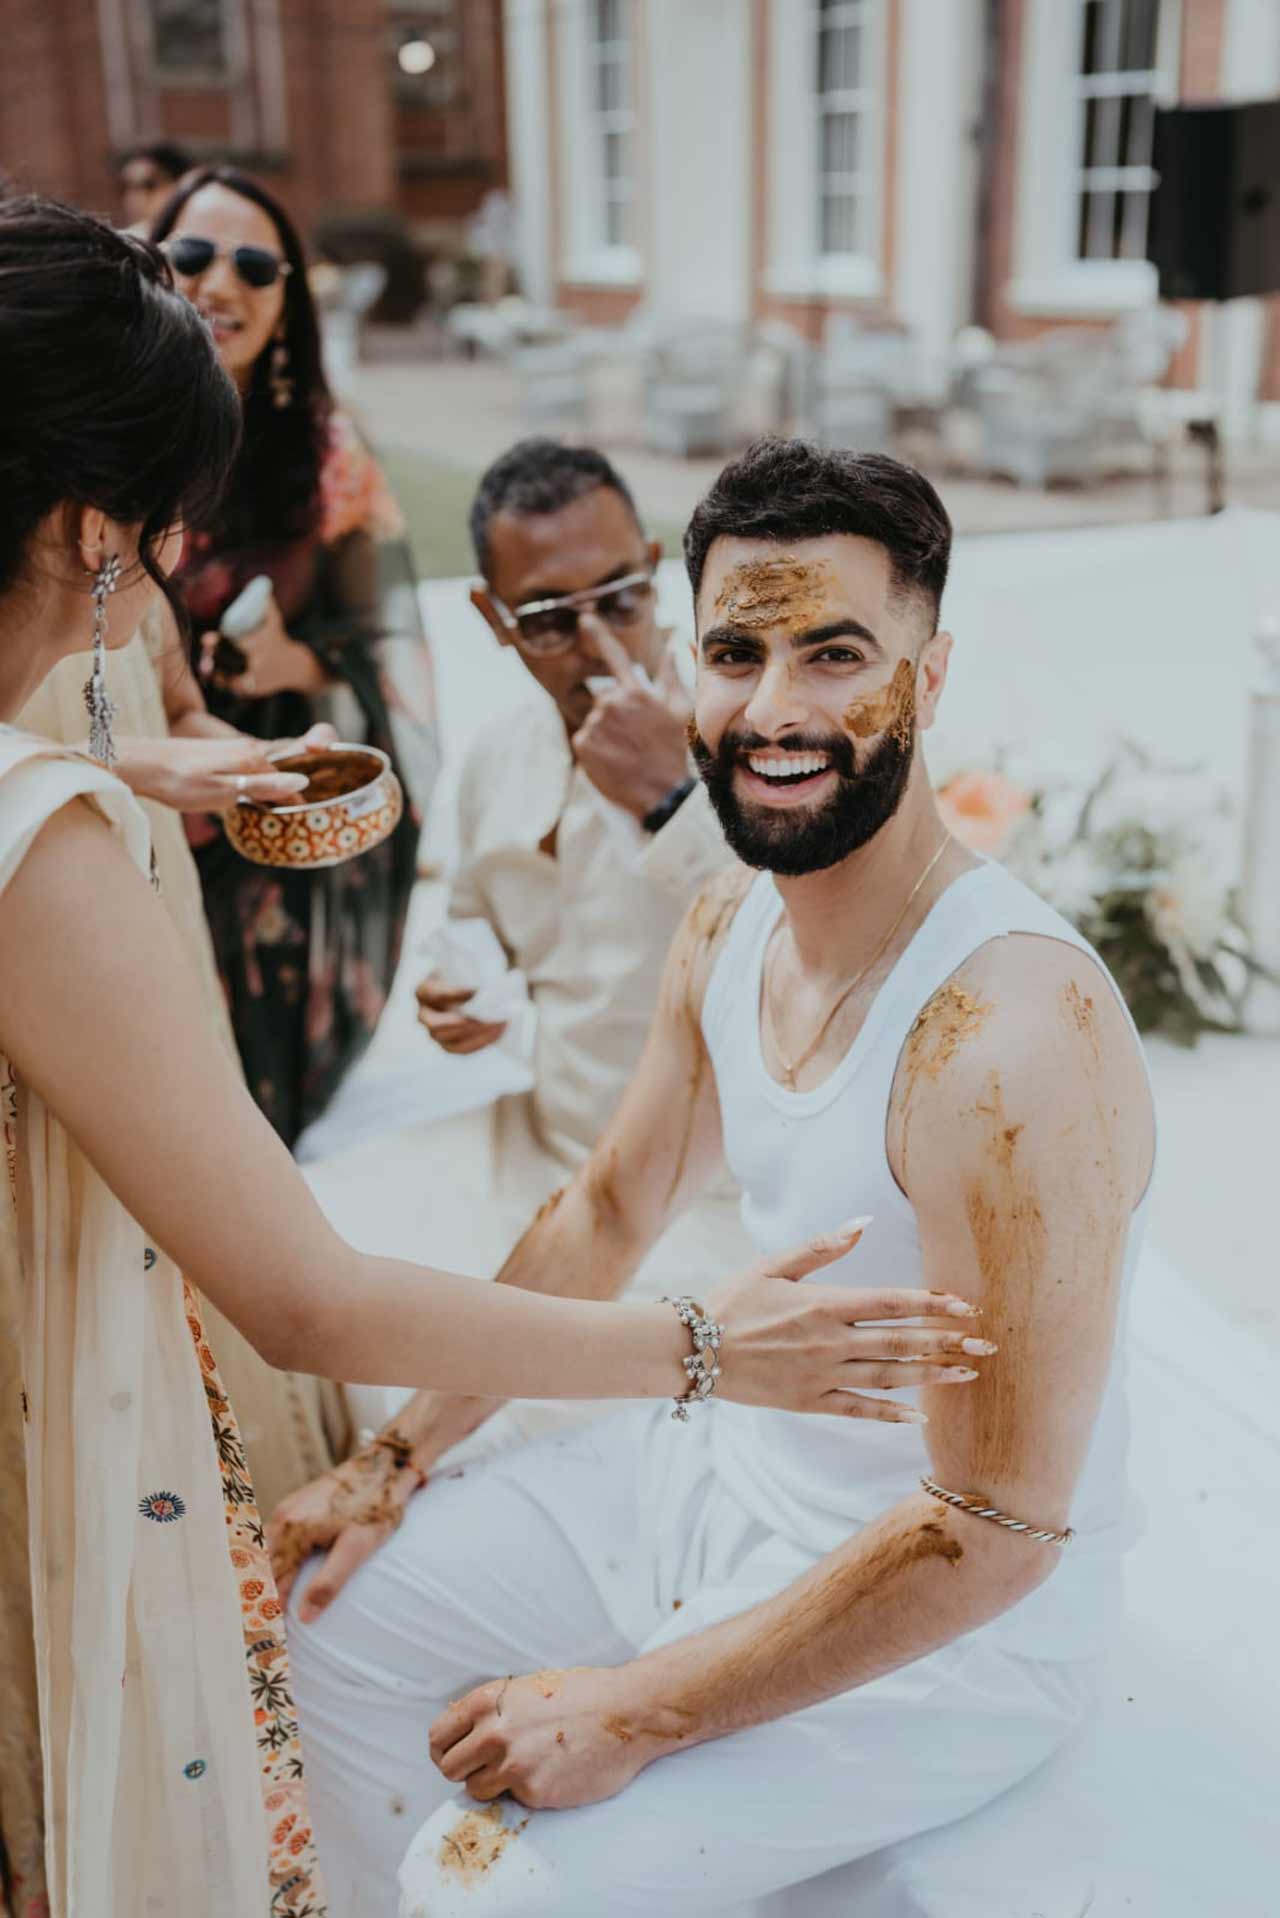 For the Haldi ceremony, Ankur Rathee decided to keep it minimal with a white vest and a white pyjama